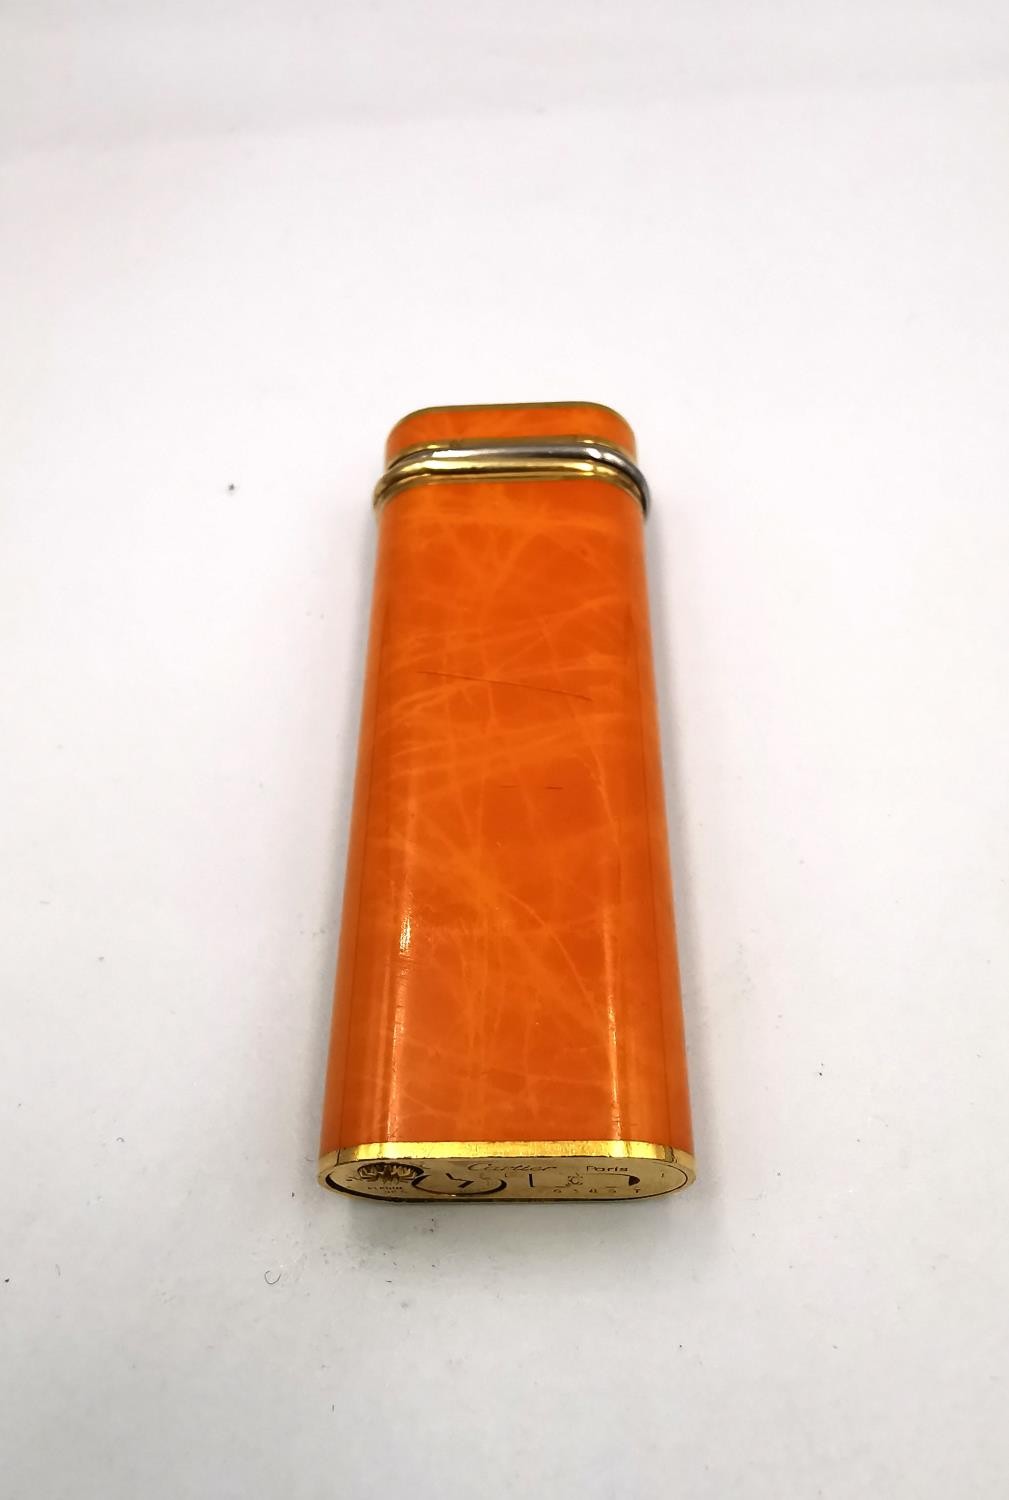 Cartier Must de Cartier lighter with three colour gold plated bands and orange marbled finish. - Image 2 of 7